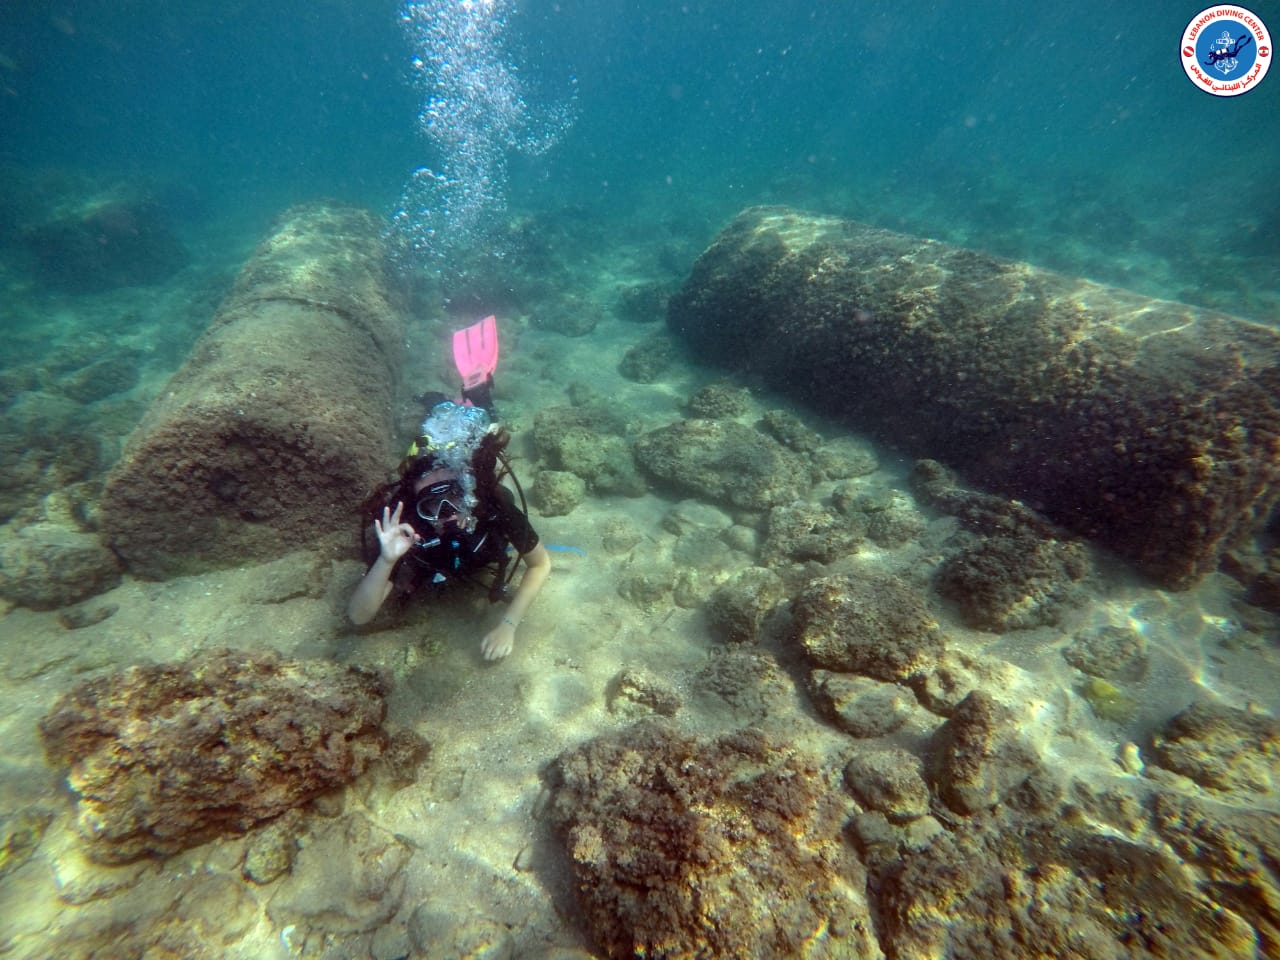 A diver swimming among the ruins of Tyre.